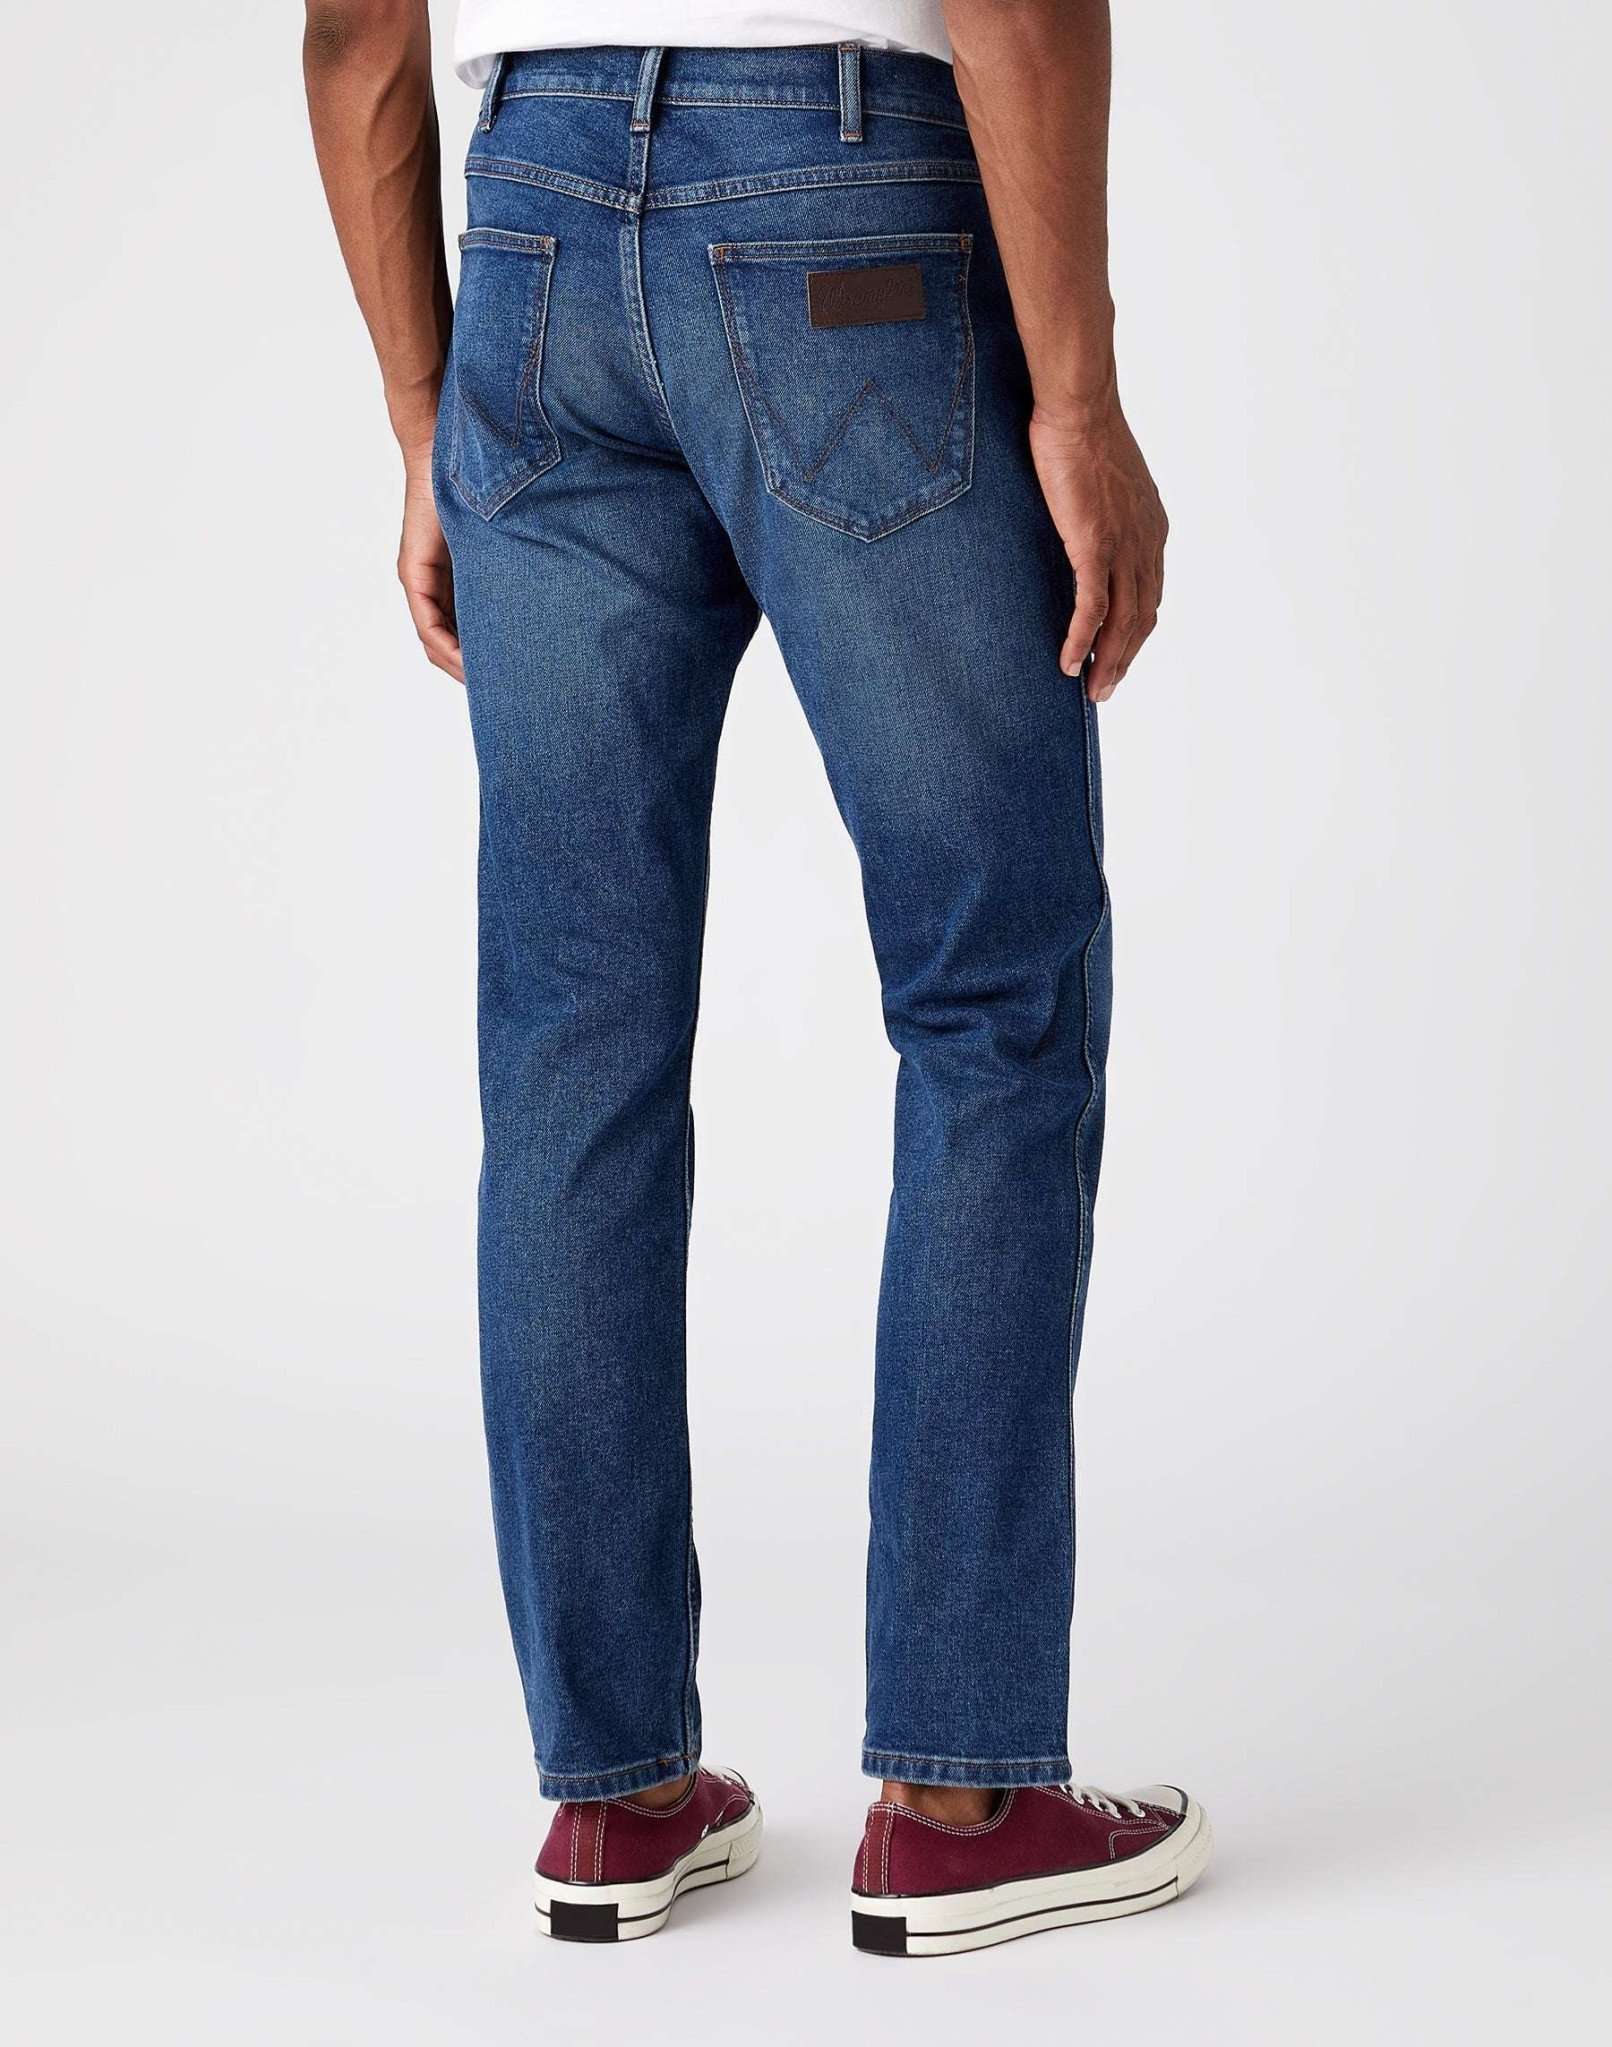 Greensboro Low Stretch in Blue Arcade Jeans Wrangler   